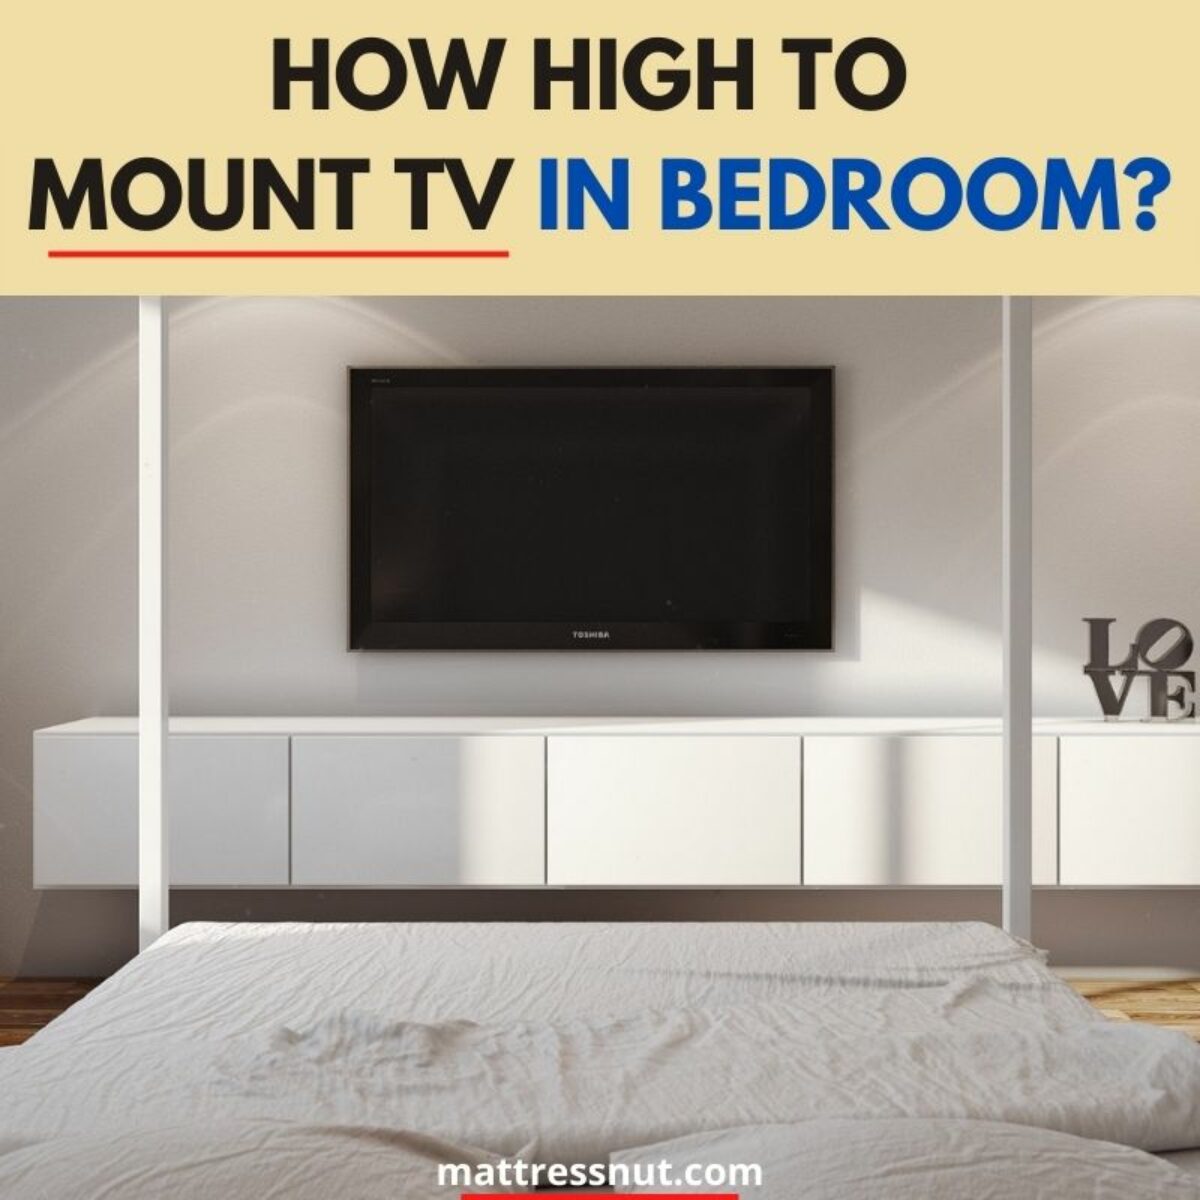 How mount tv in bedroom? the ideal height to it